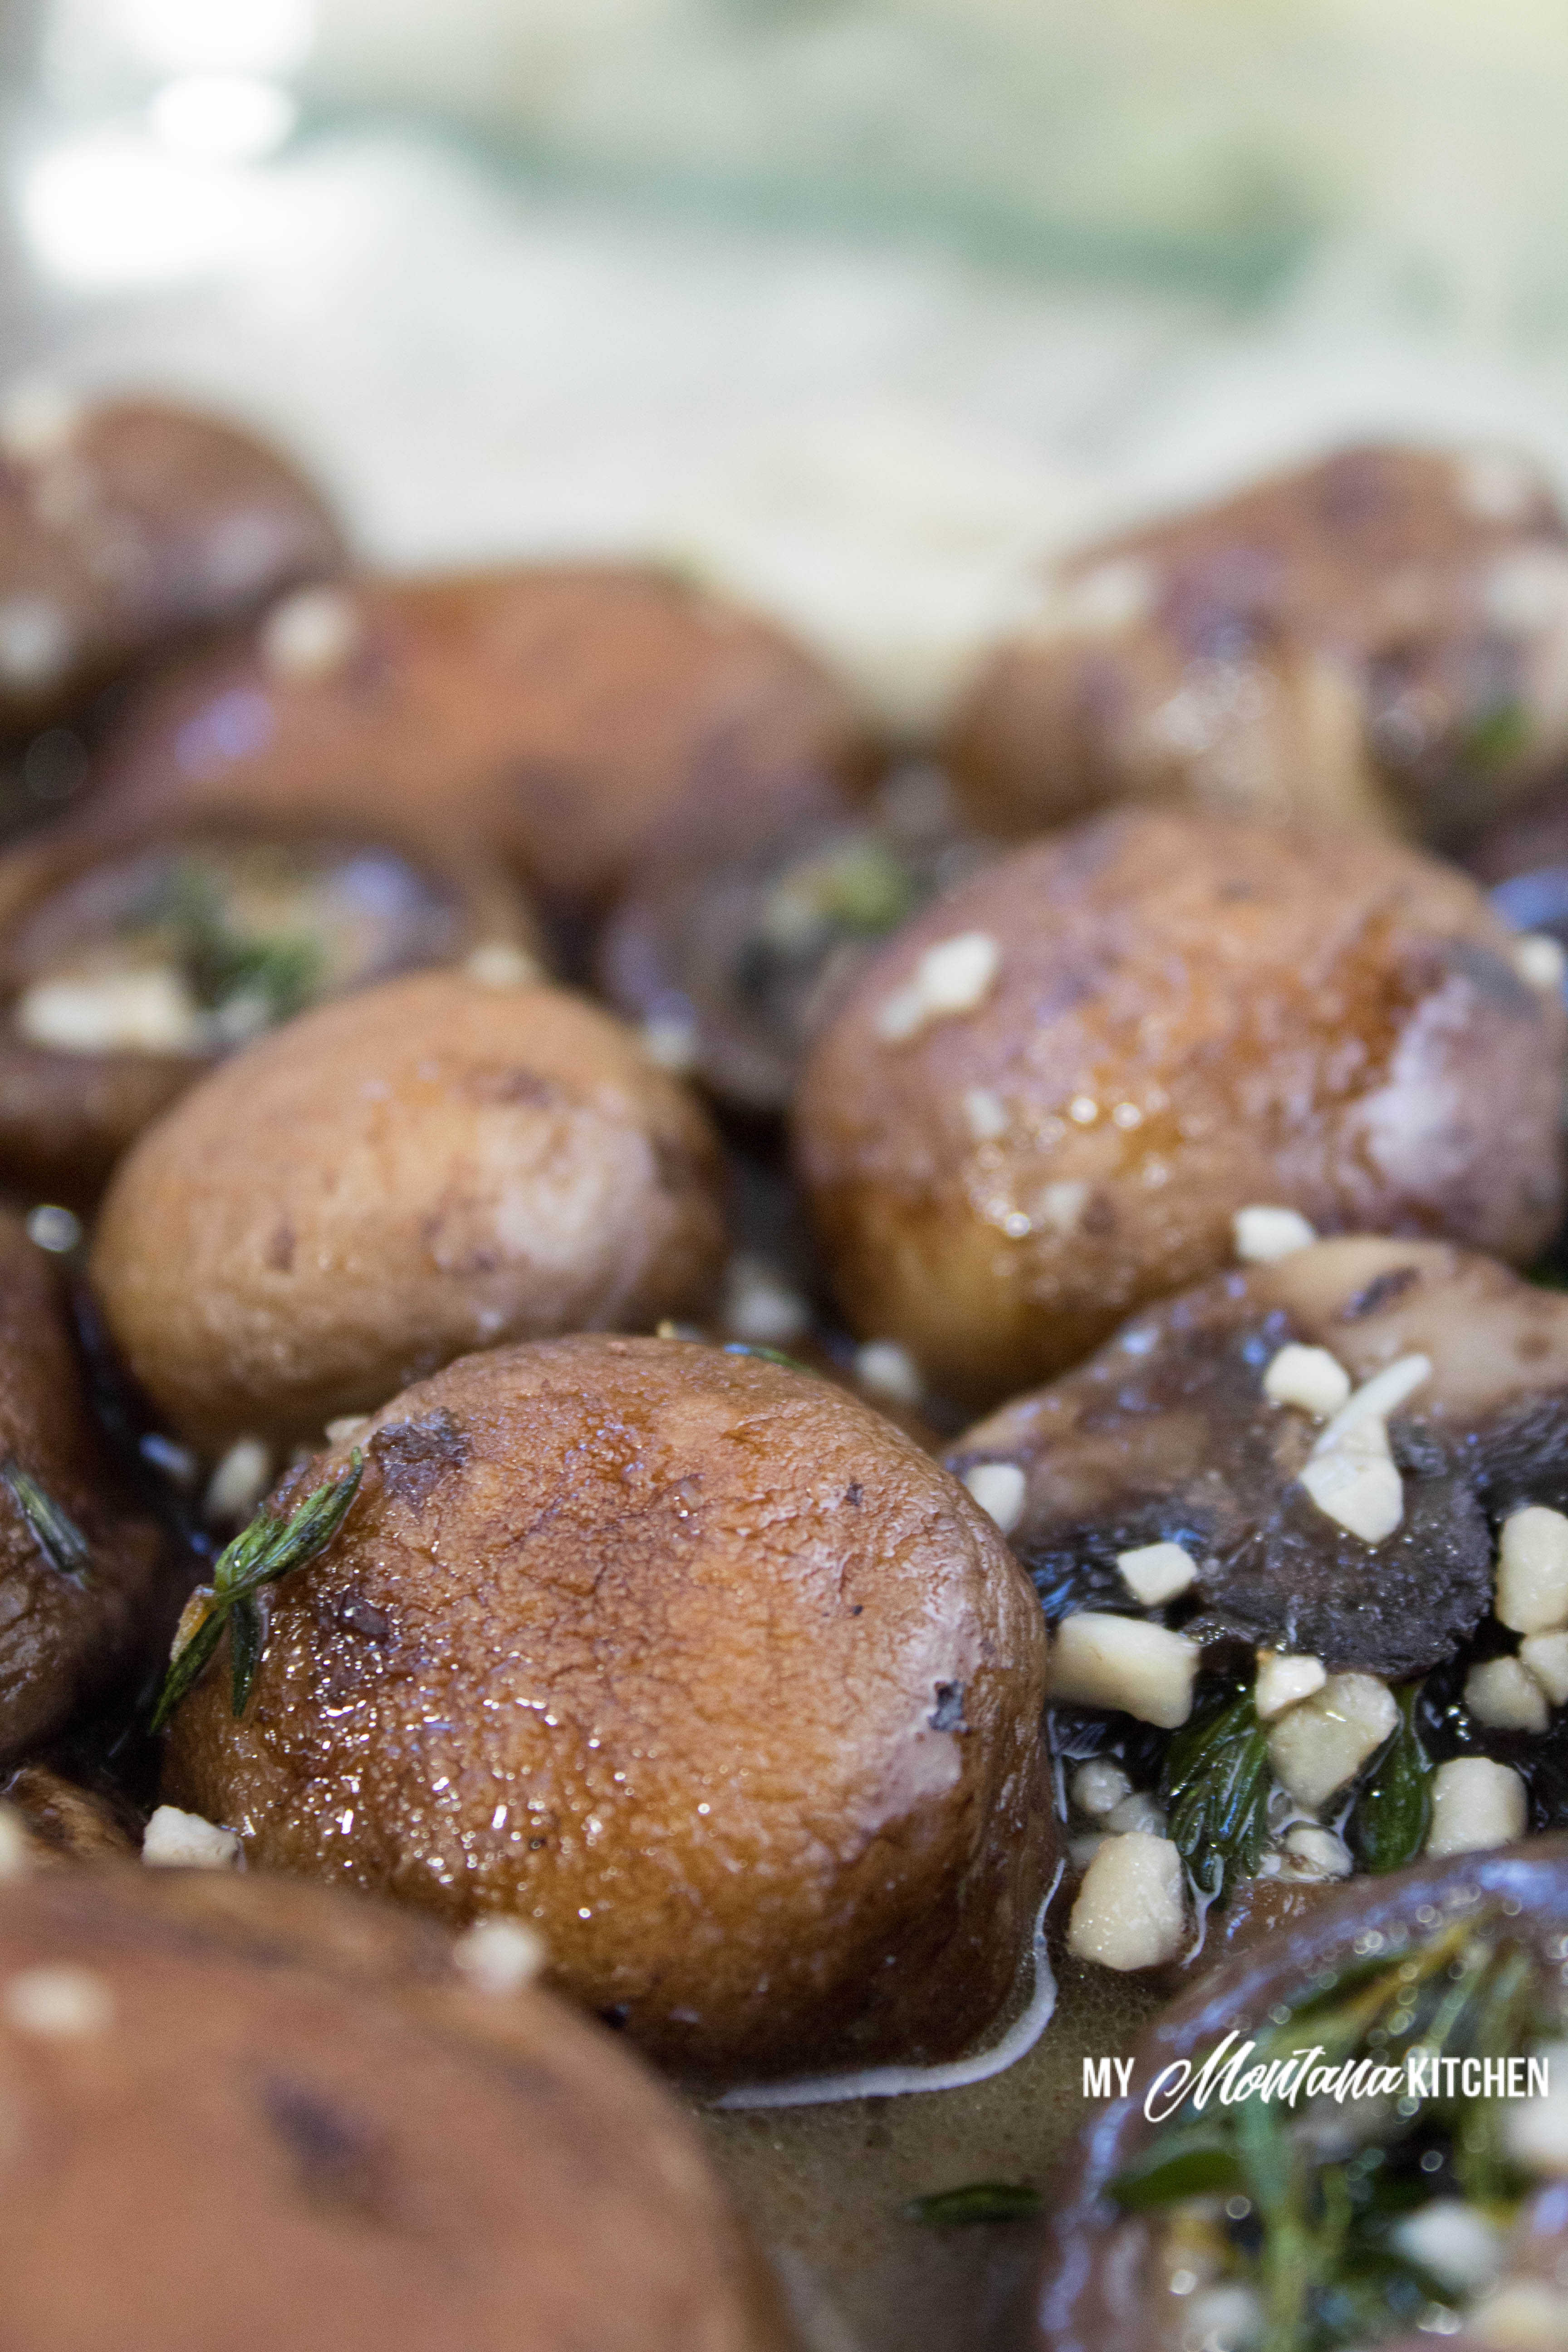 Baked Mushrooms with Butter and Thyme (Low Carb, Keto, THM-S) #trimhealthymama #thm #thms #lowcarb #keto #mushrooms #bakedmushrooms #thmsidedishes #glutenfree